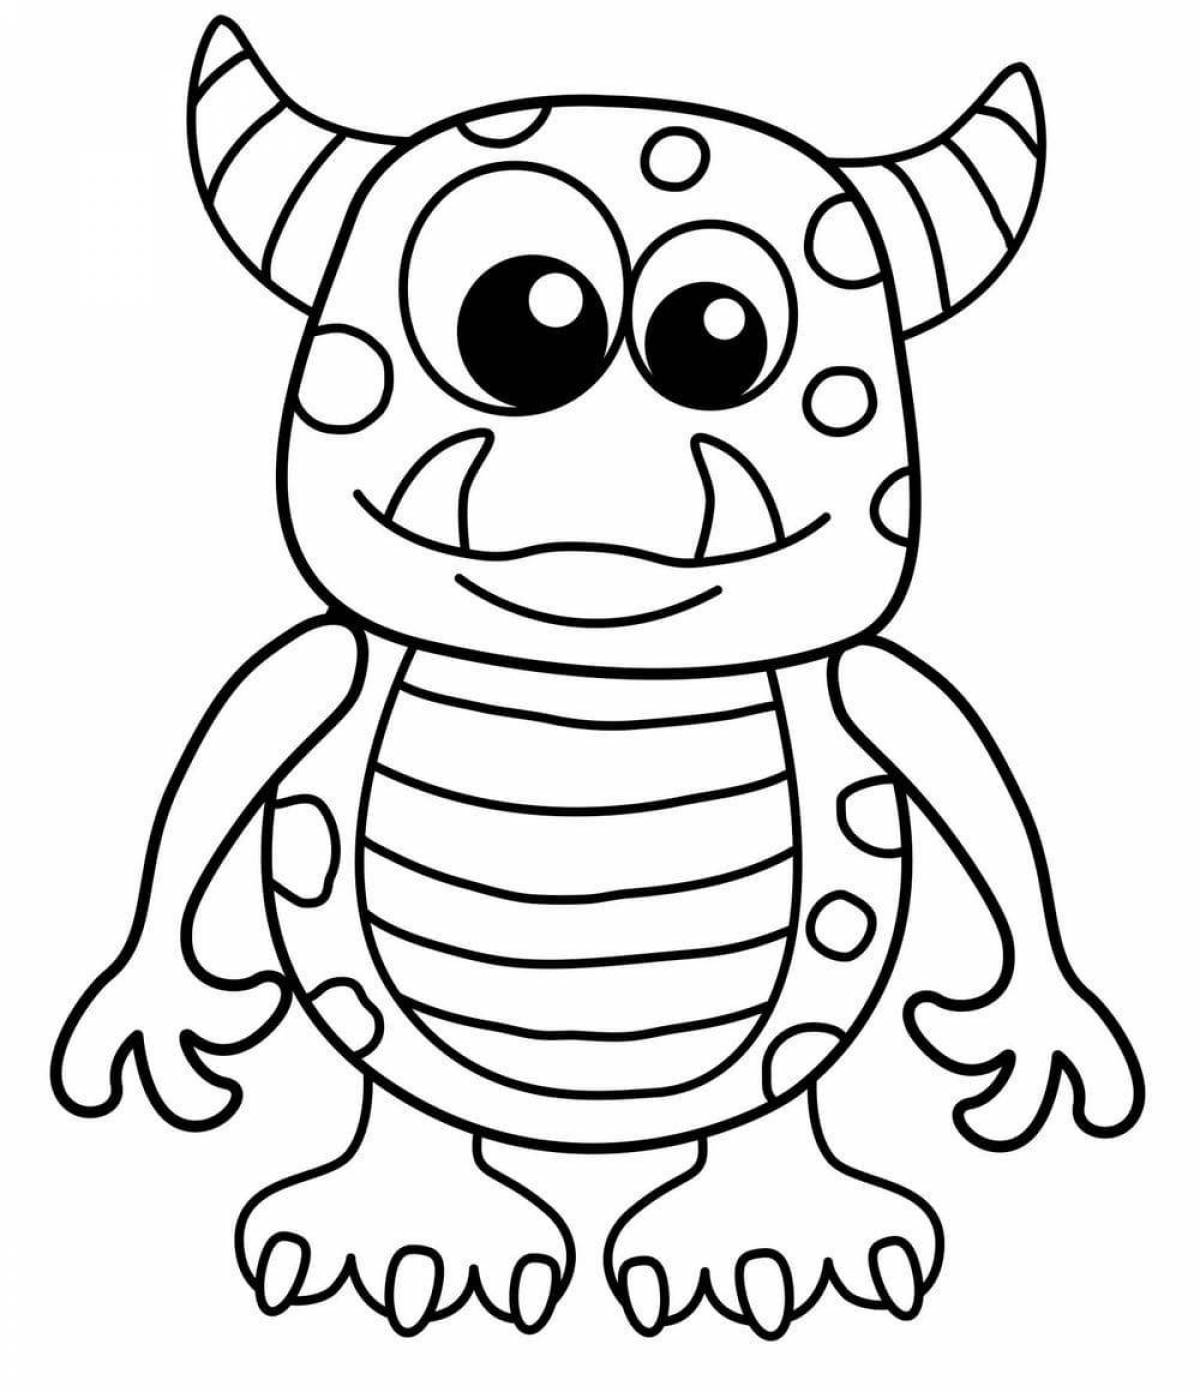 Terrible monster coloring pages